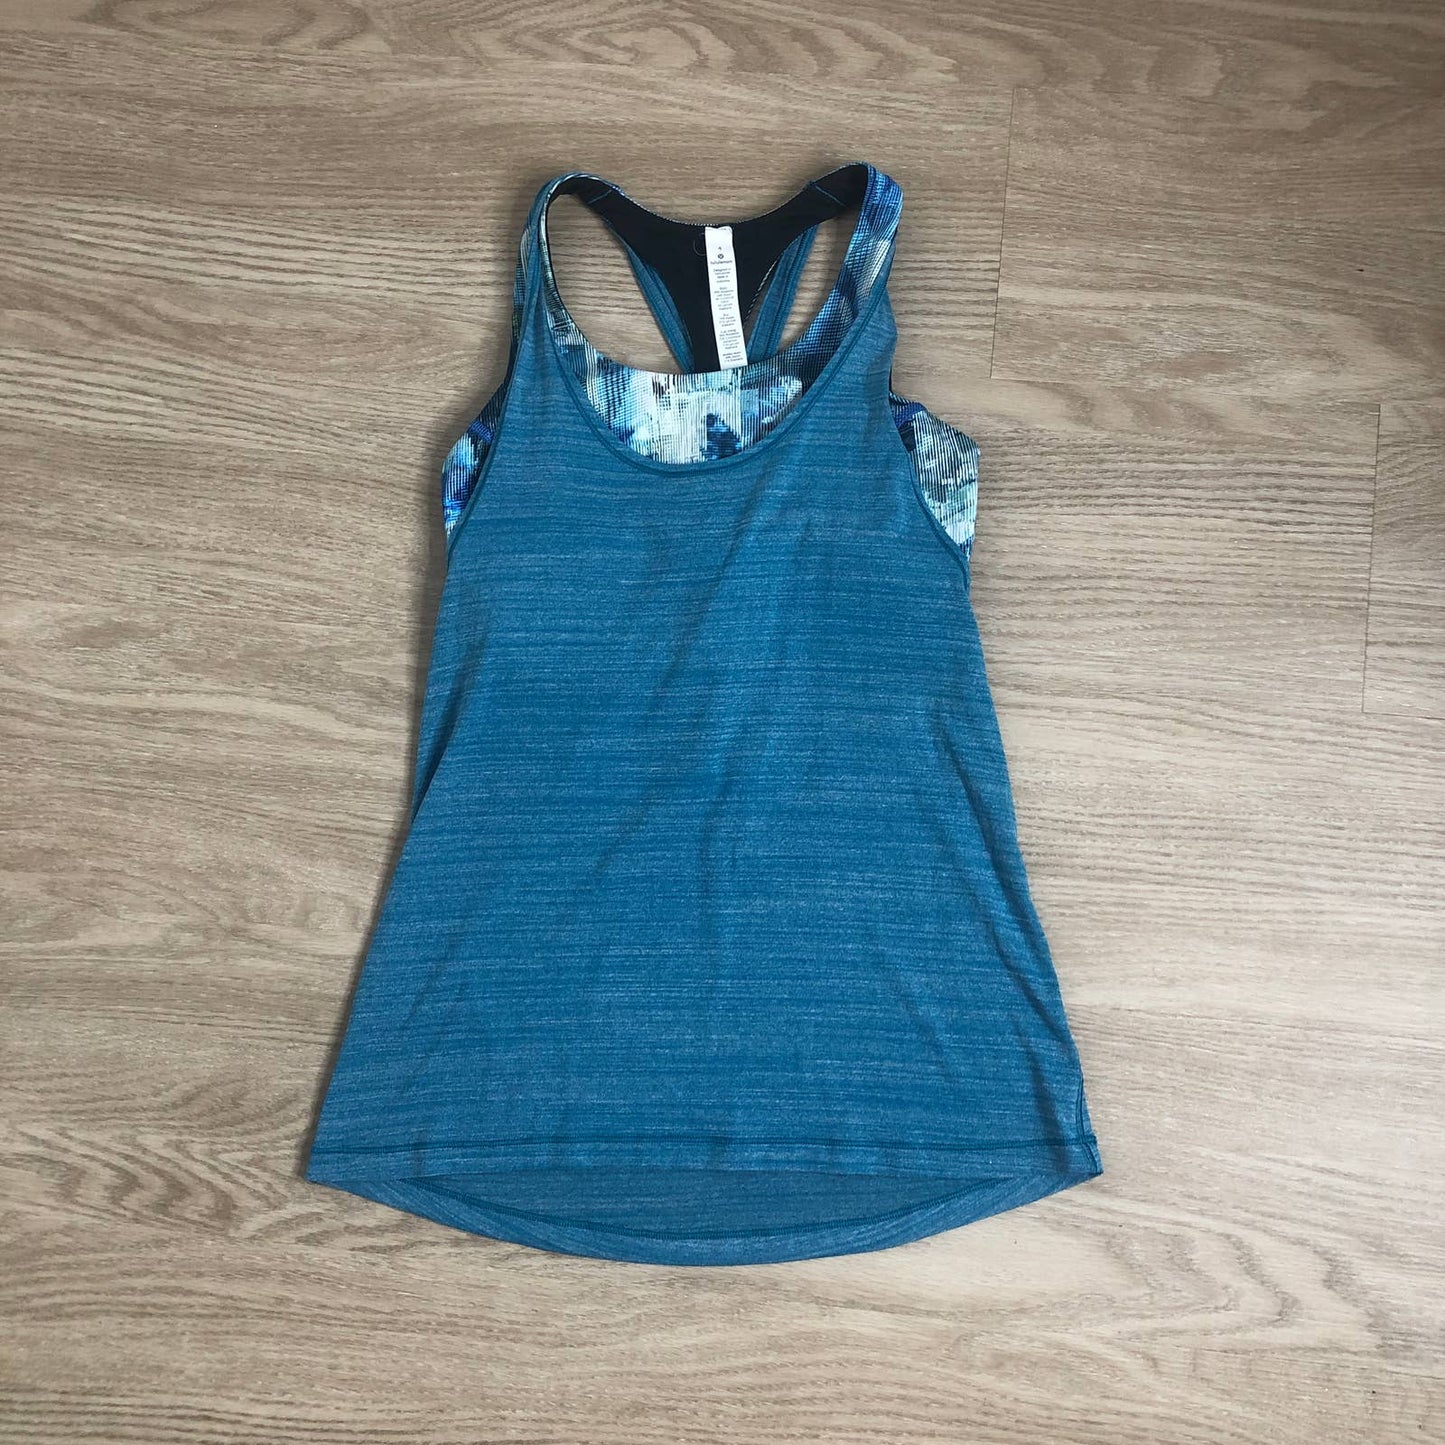 Lululemon Twist & Toil blue abstract print tank top with sports bra and padding